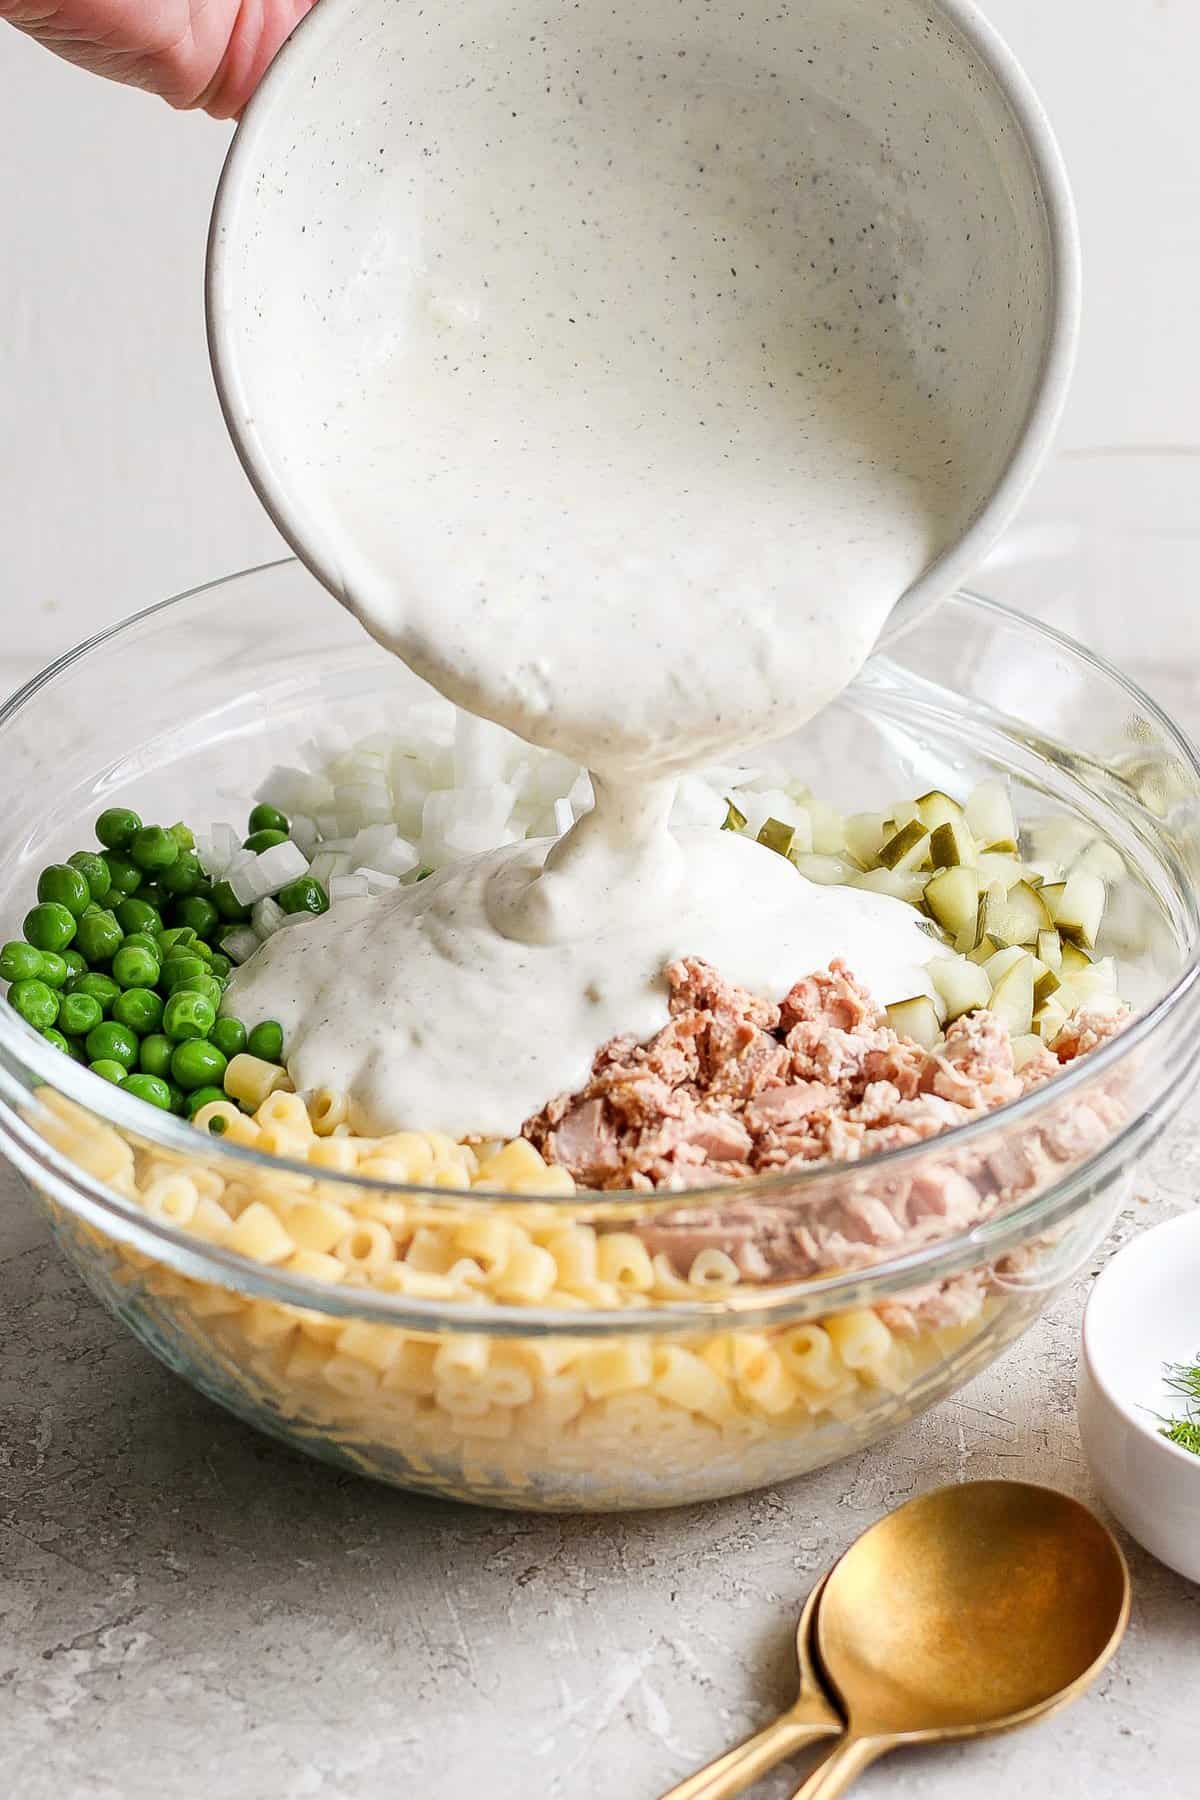 A person pours creamy sauce into a bowl containing macaroni, tuna, c،pped onions, and peas for a salad.